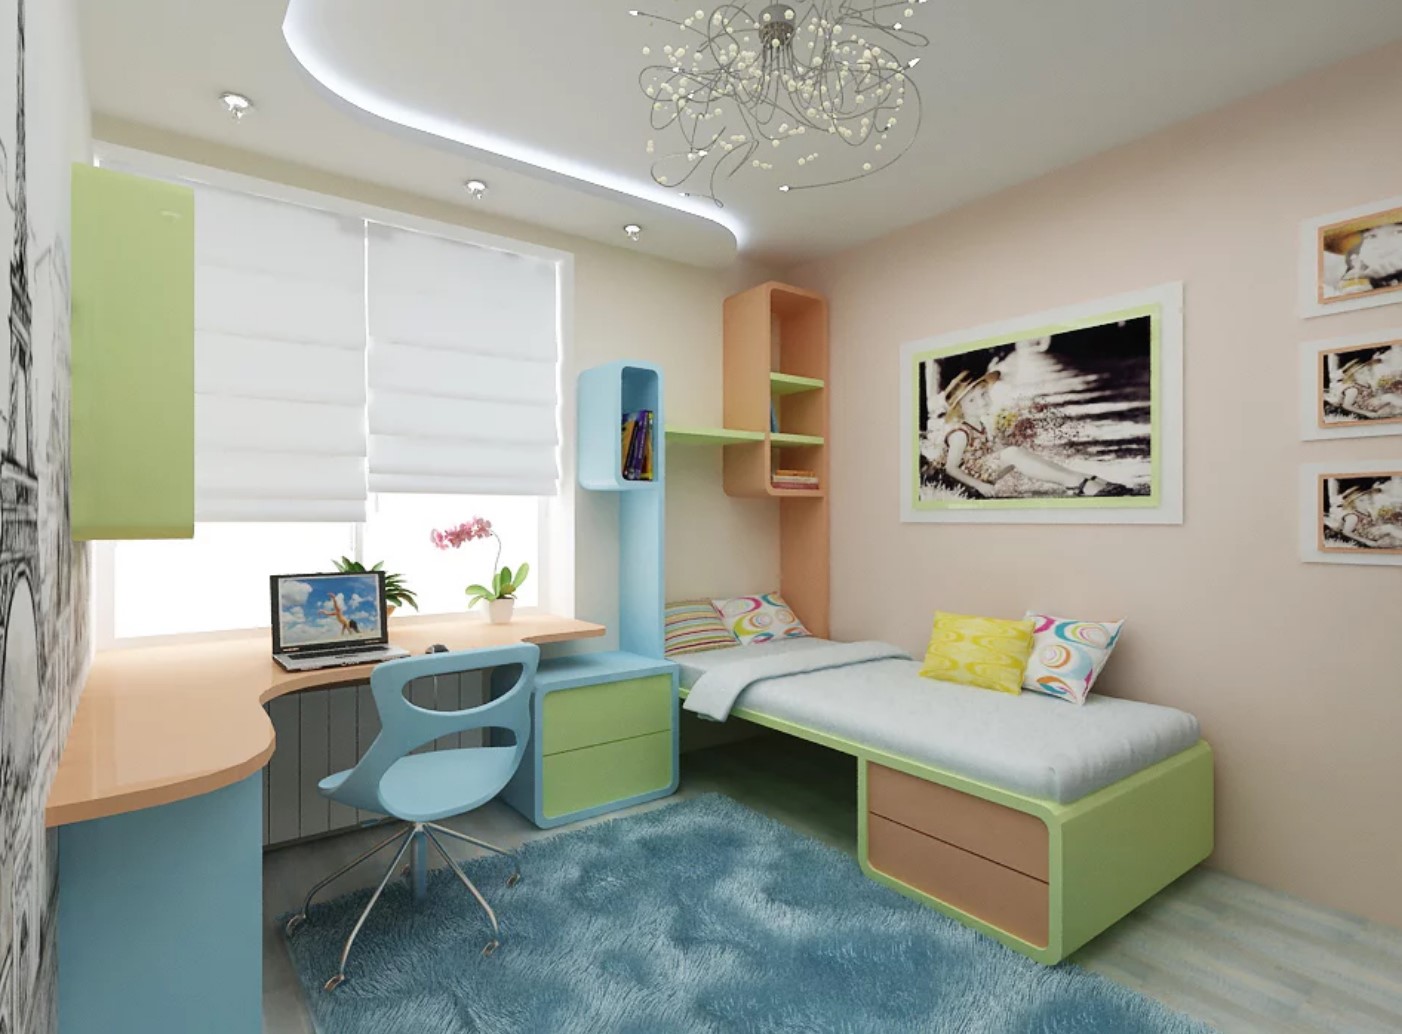 Room with pastel furniture